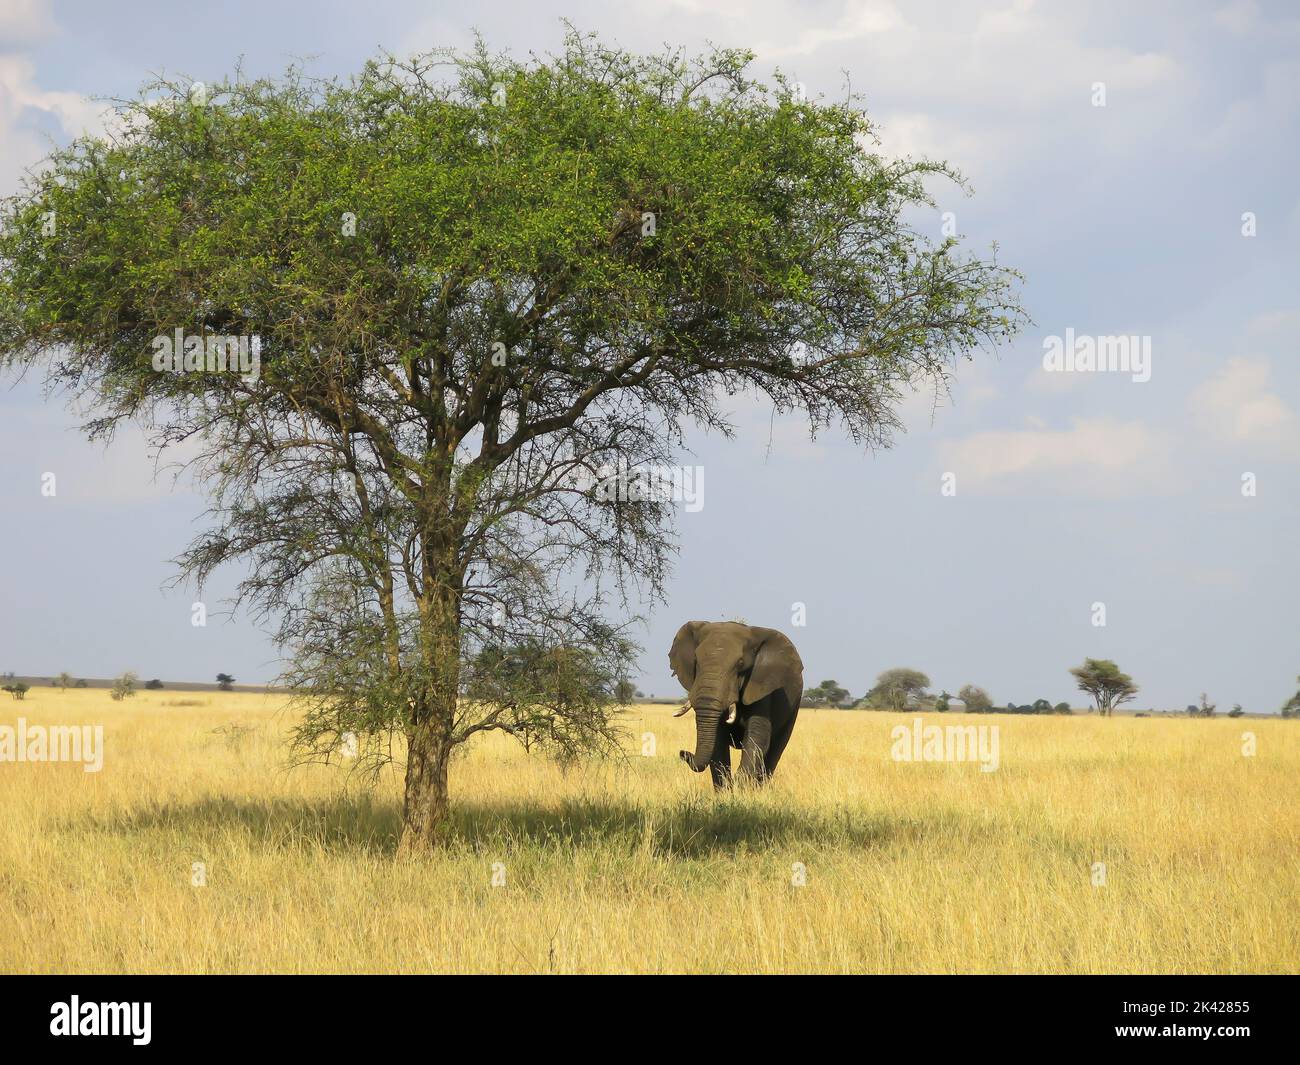 An Elephant on the Move in the Serengeti National Park Stock Photo